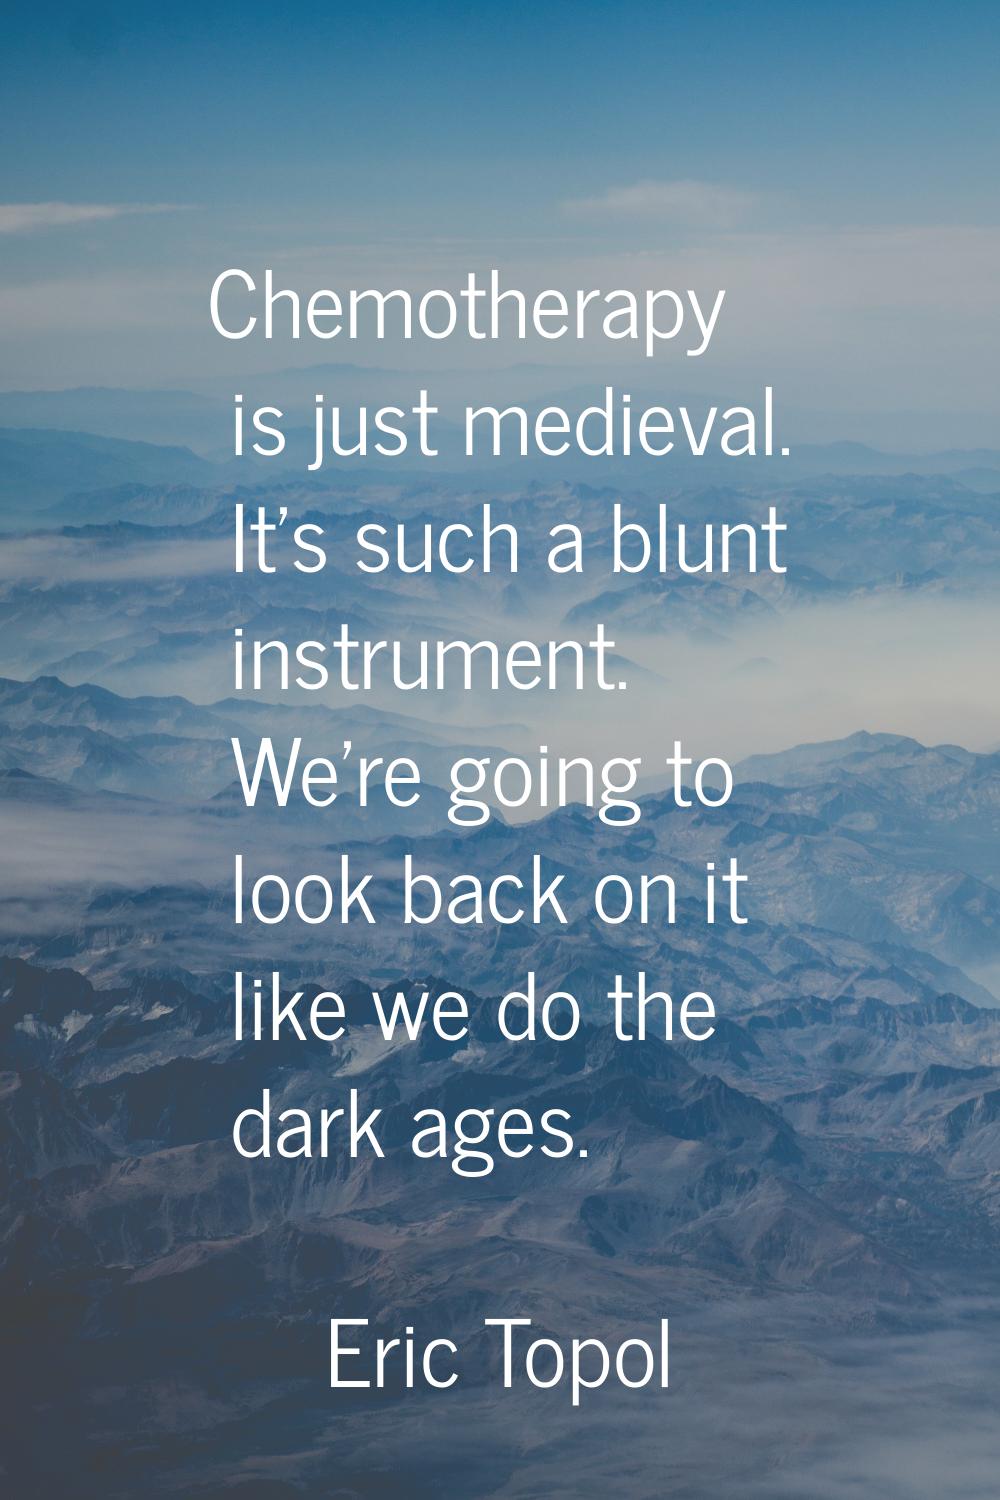 Chemotherapy is just medieval. It's such a blunt instrument. We're going to look back on it like we